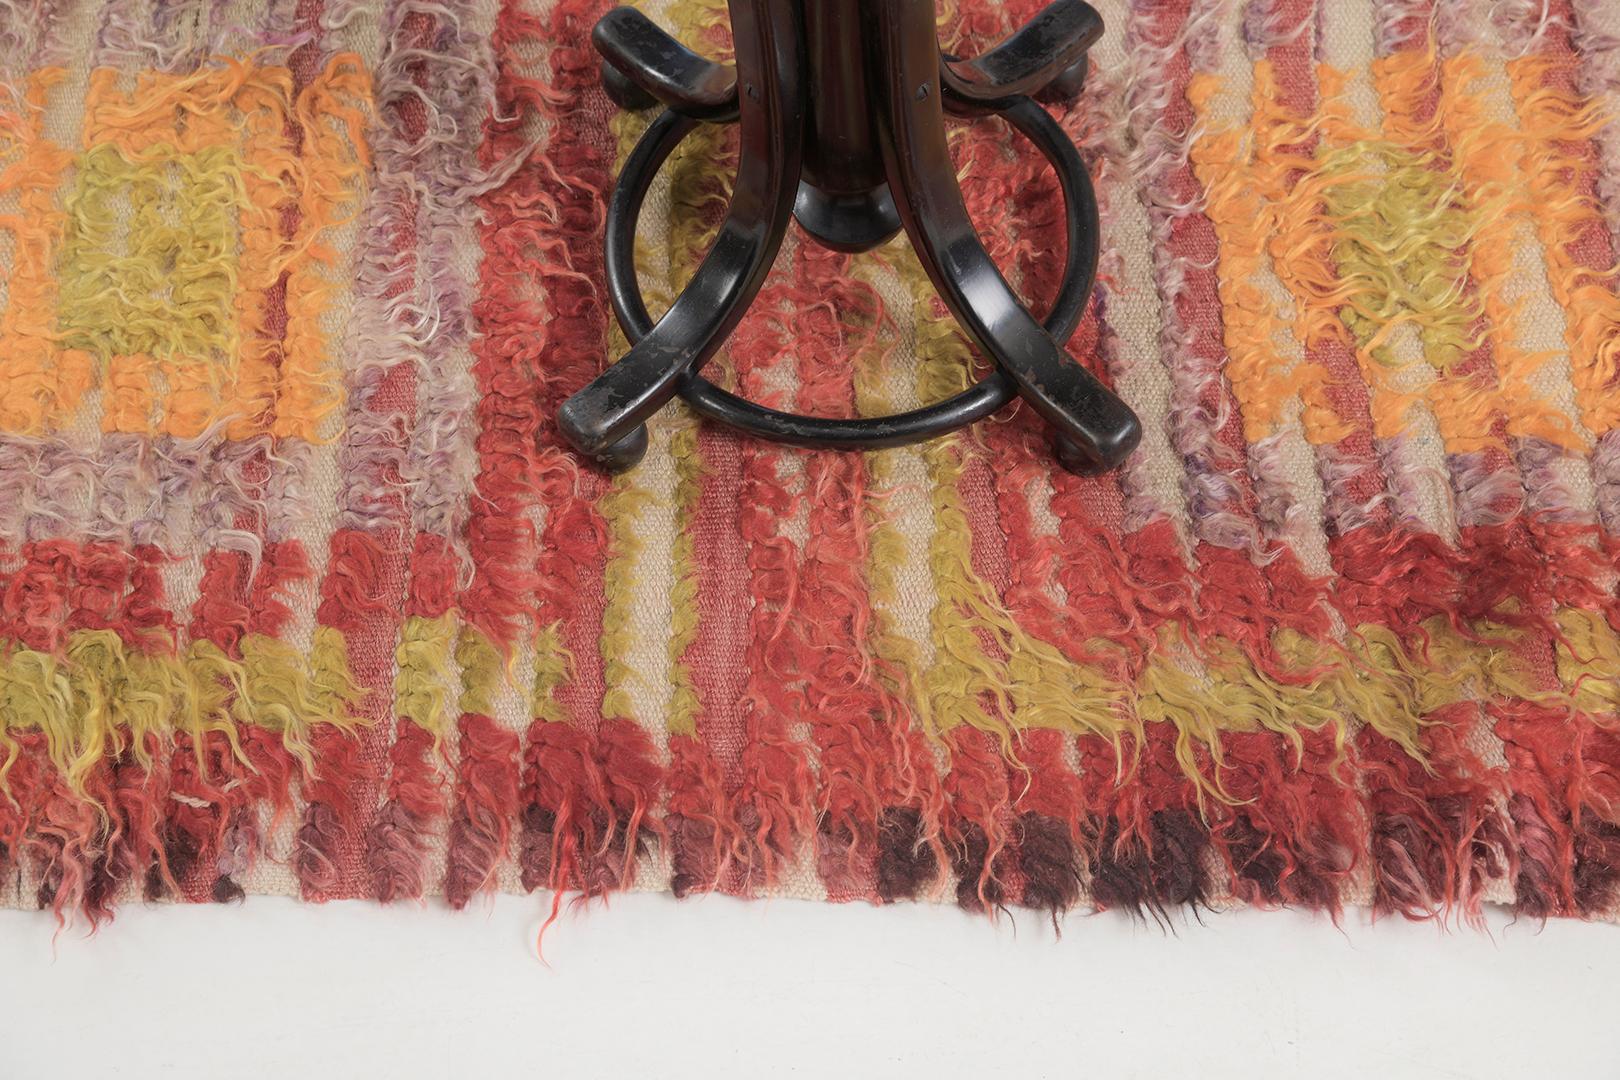 Tulu is a luxurious wool shag that features a vibrant tone of gold and rose, calming shades of brown and ivory. It augments the stunning scenery that has ever been made to. Turkish Anatolian rugs weave together dyes and colors, motifs, textures, and